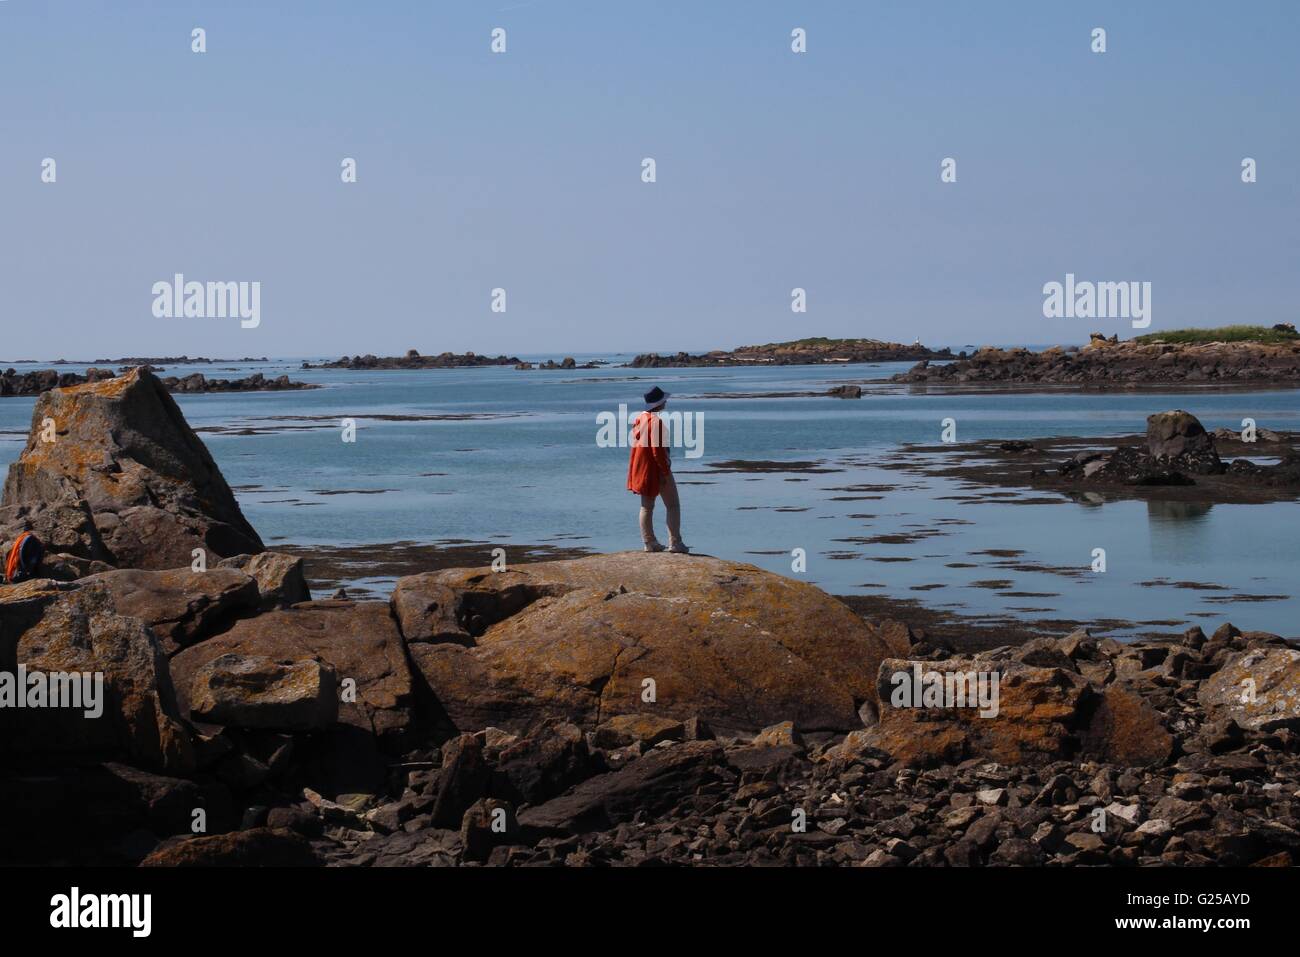 Woman standing on rocks, looking out to sea, Chausey, Normandy, France Stock Photo